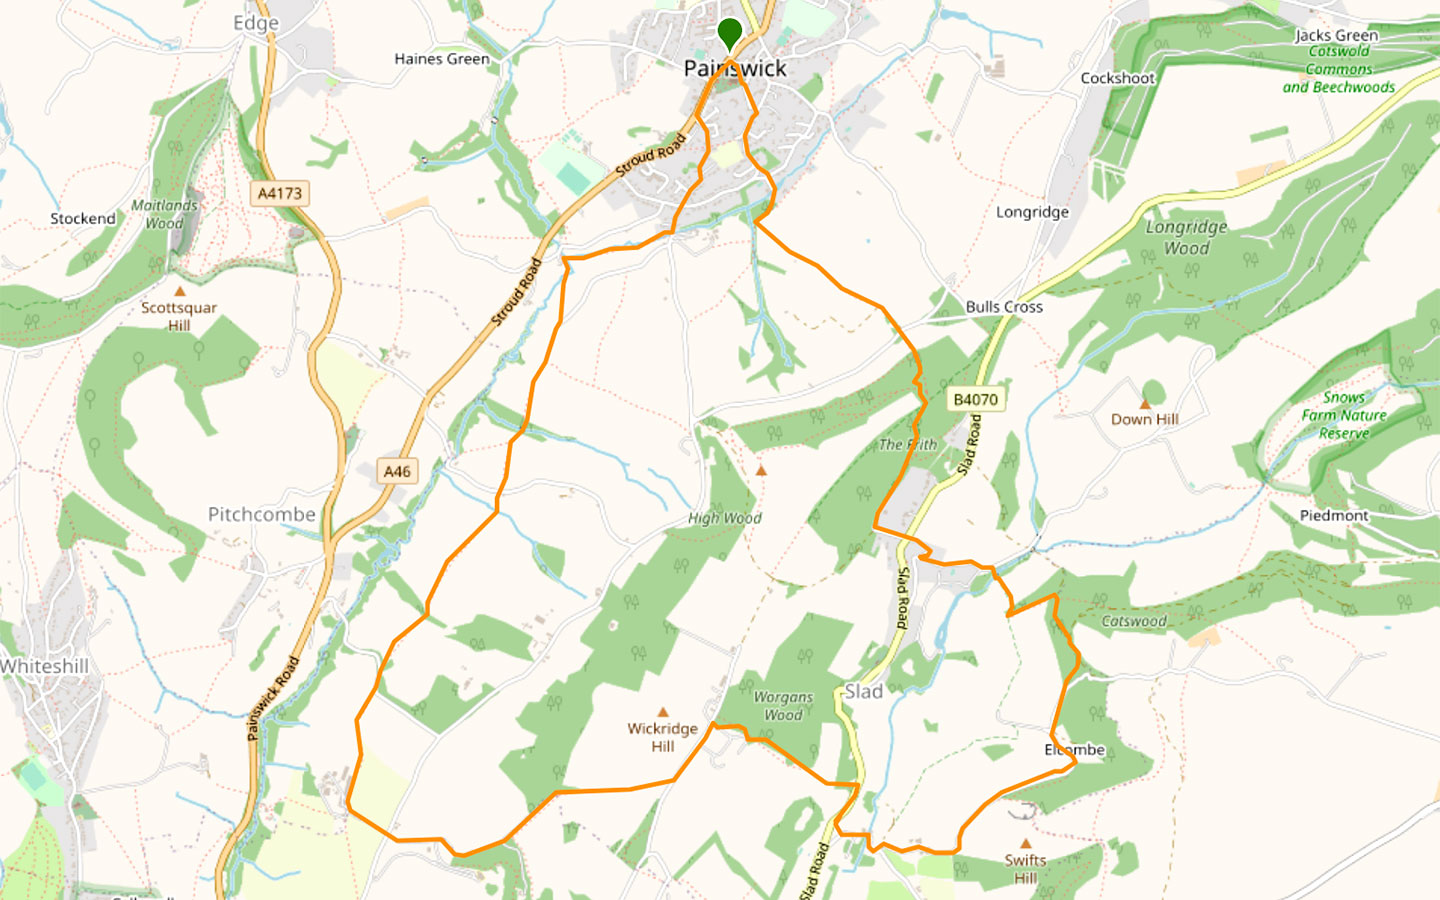 Map of the Painswick to Slad walk route in the Cotswolds